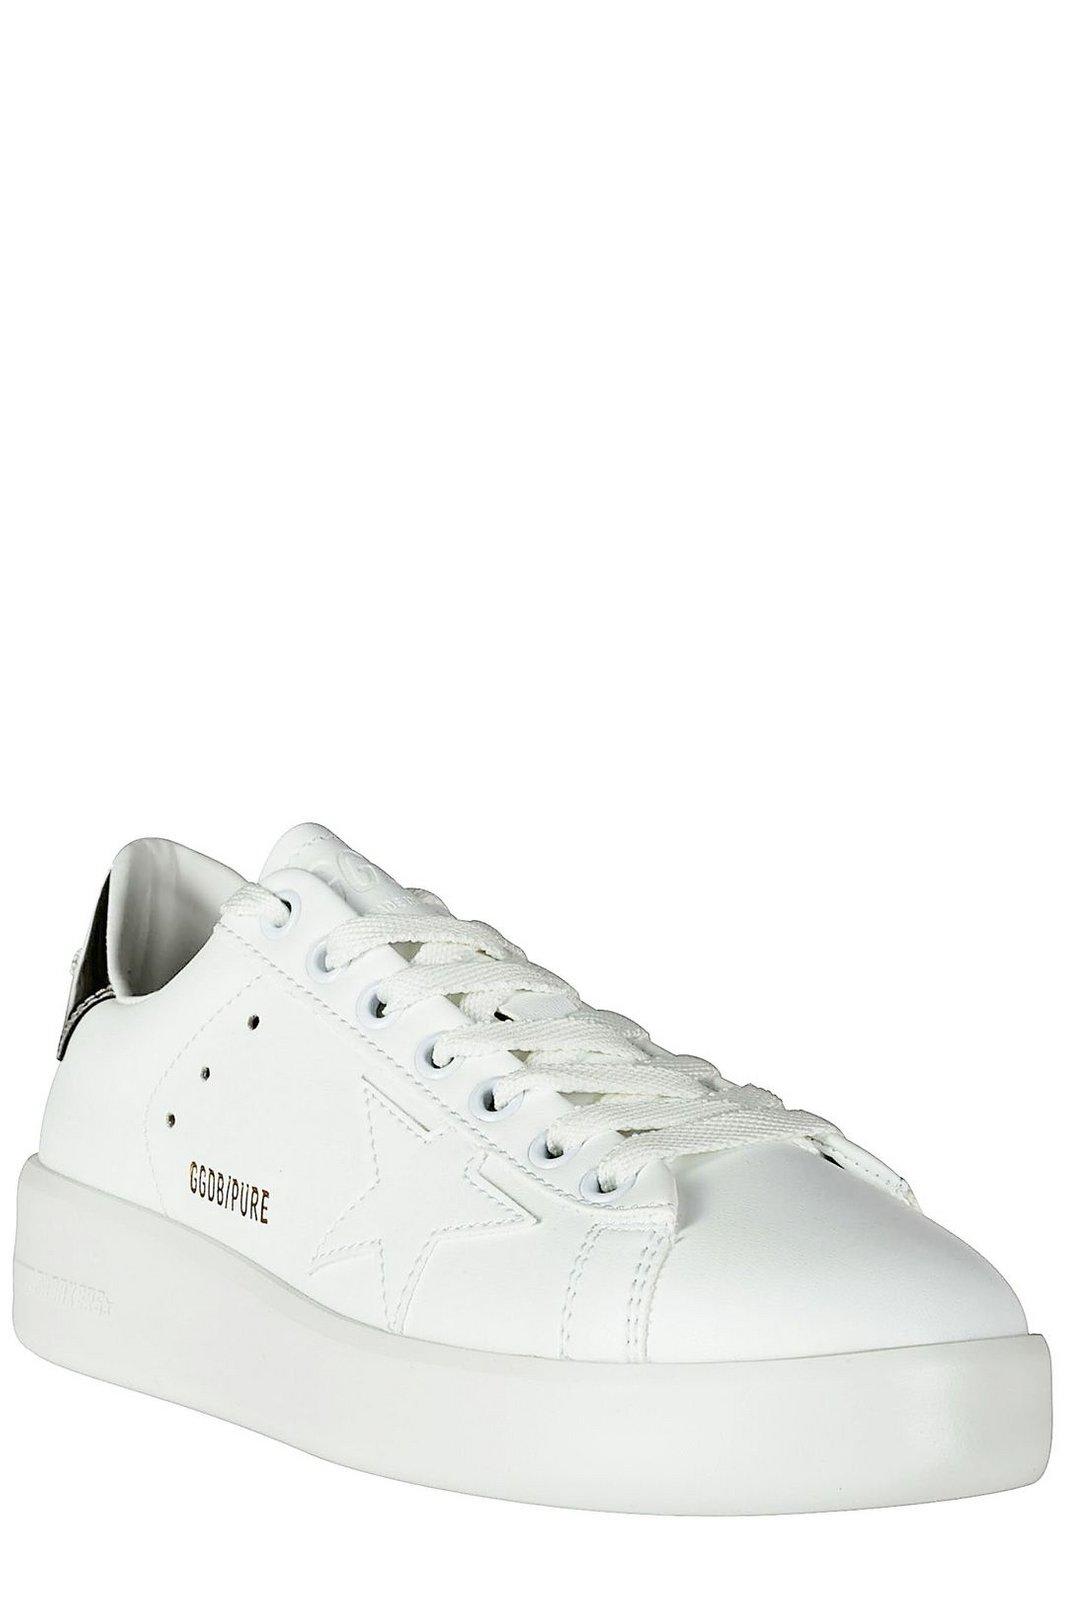 Shop Golden Goose Logo Printed Lace-up Sneakers In White/silver